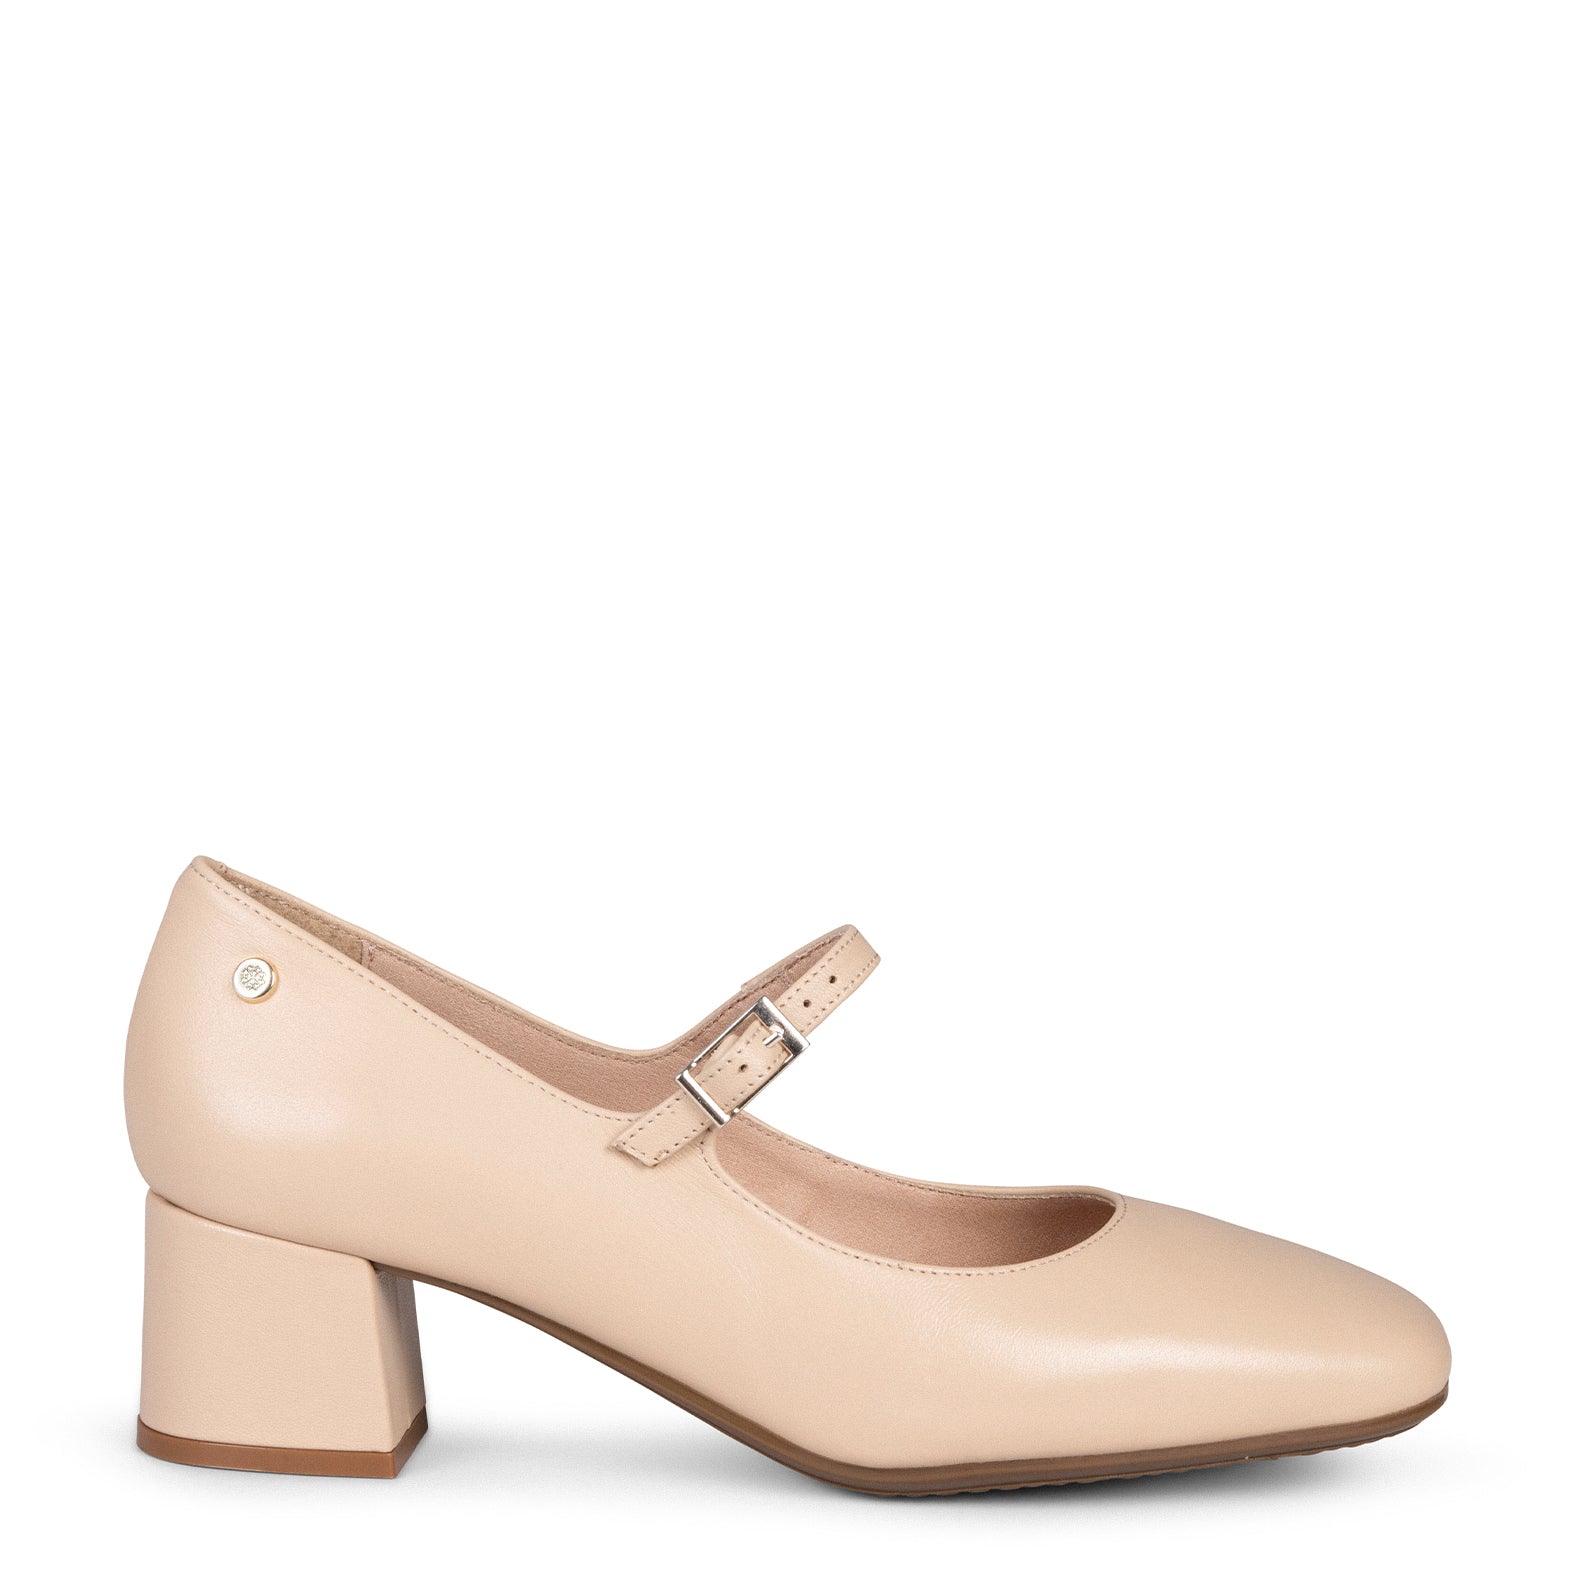 BELLA – BIEGE suede leather mary-jane shoes